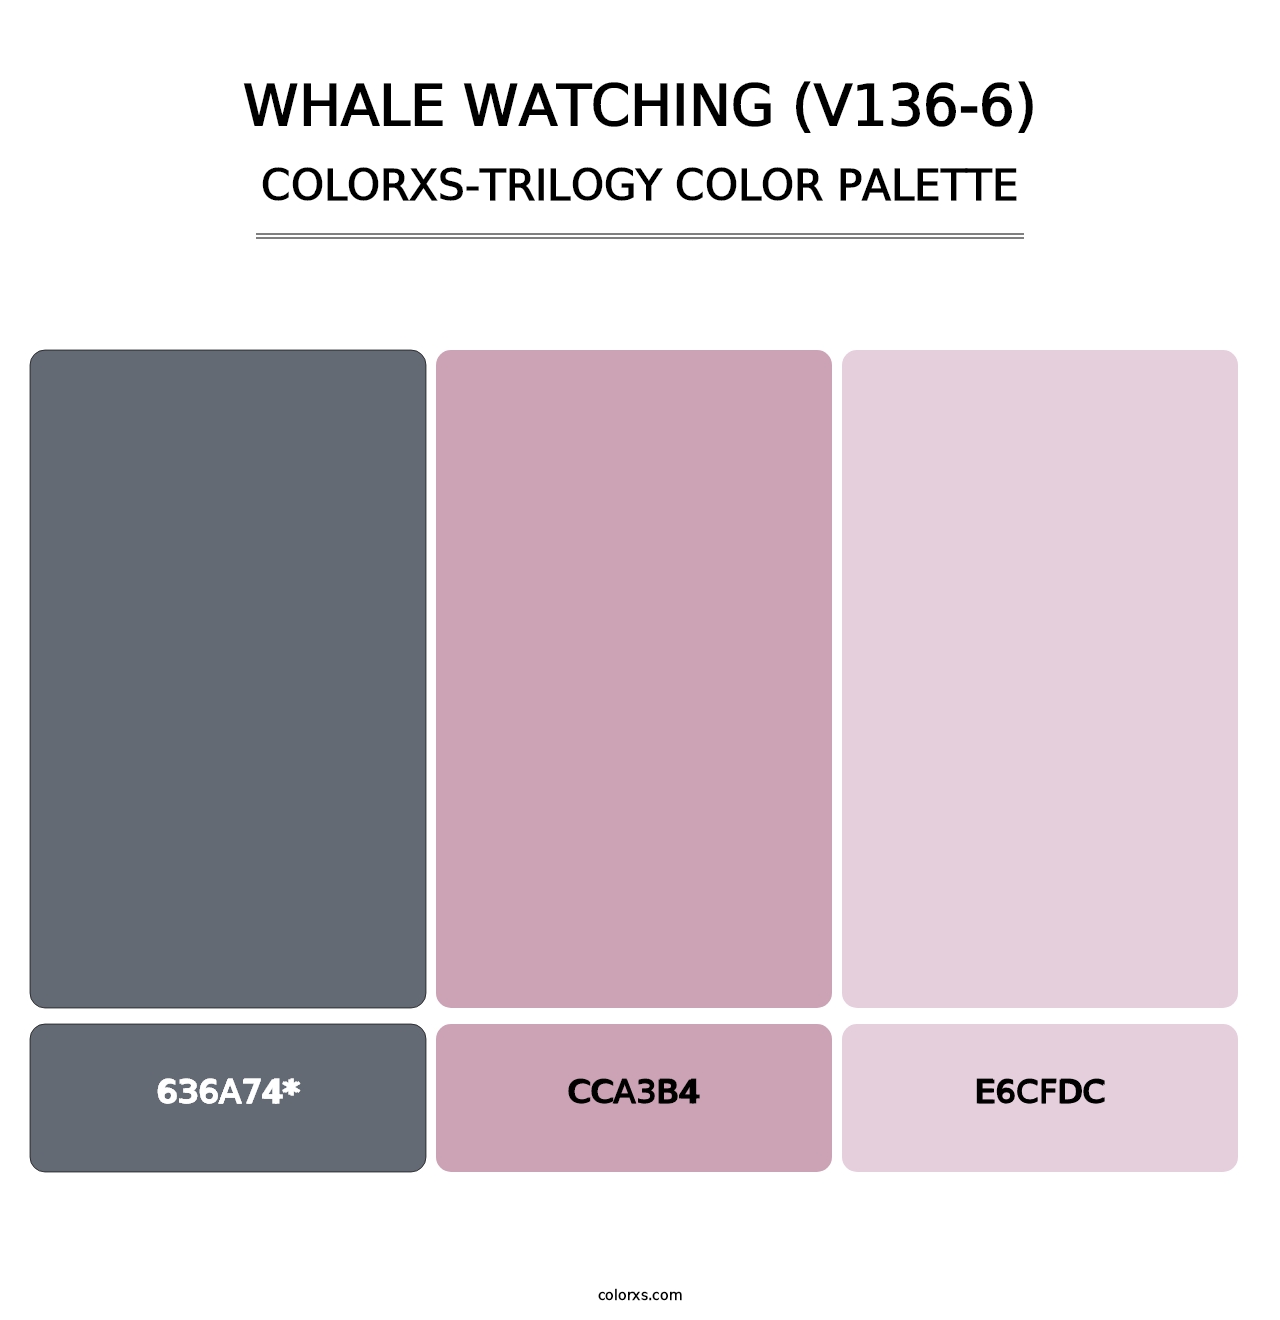 Whale Watching (V136-6) - Colorxs Trilogy Palette